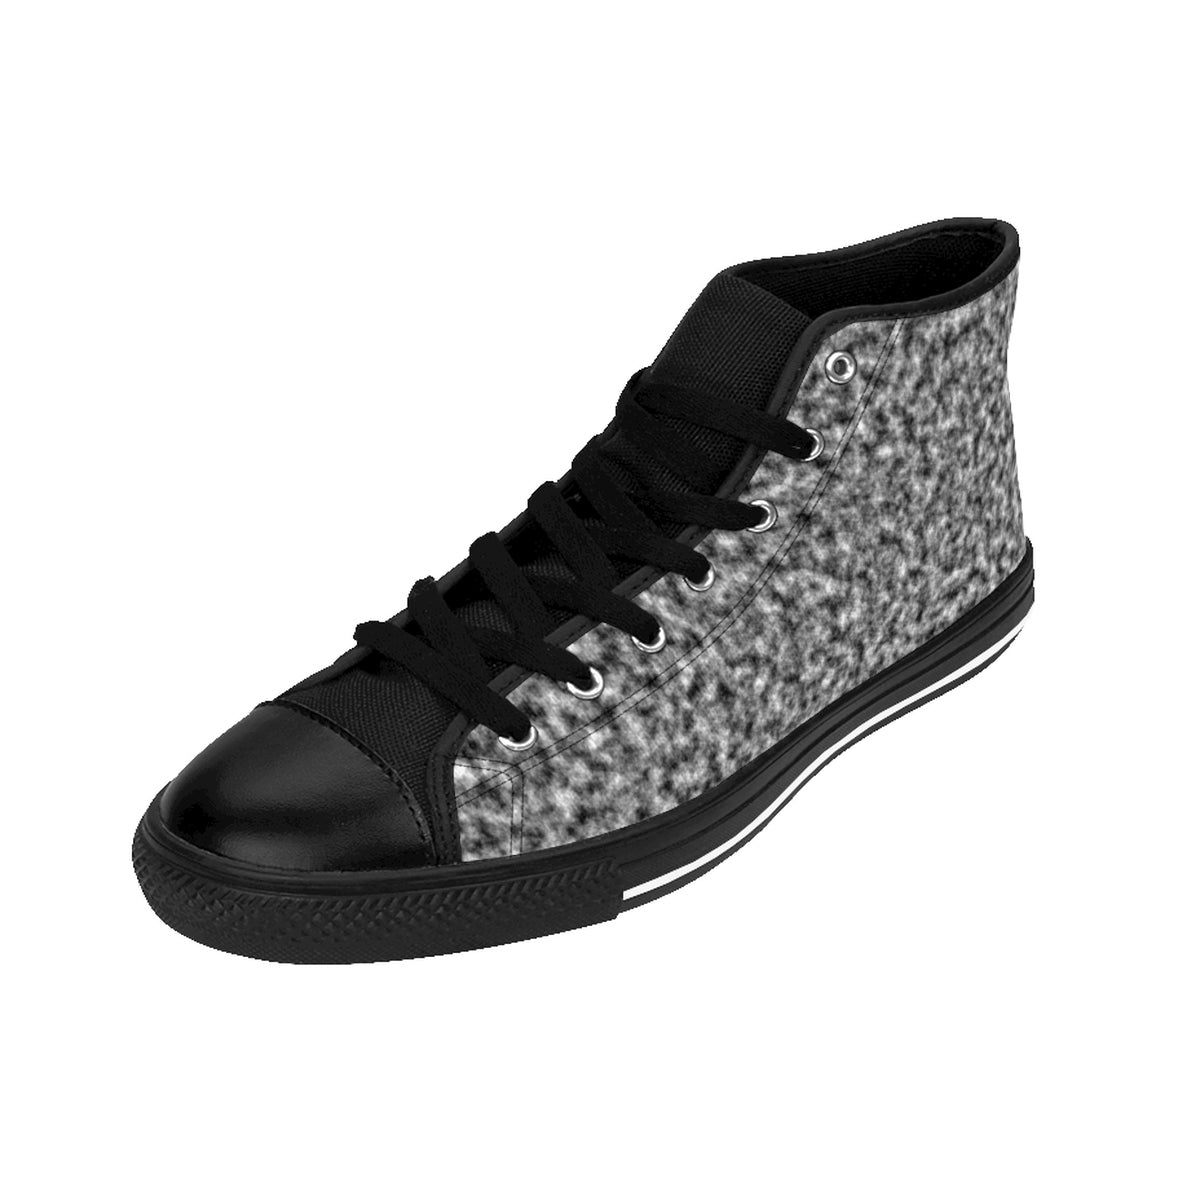 White and Black Clouds Women's High-top Sneakers